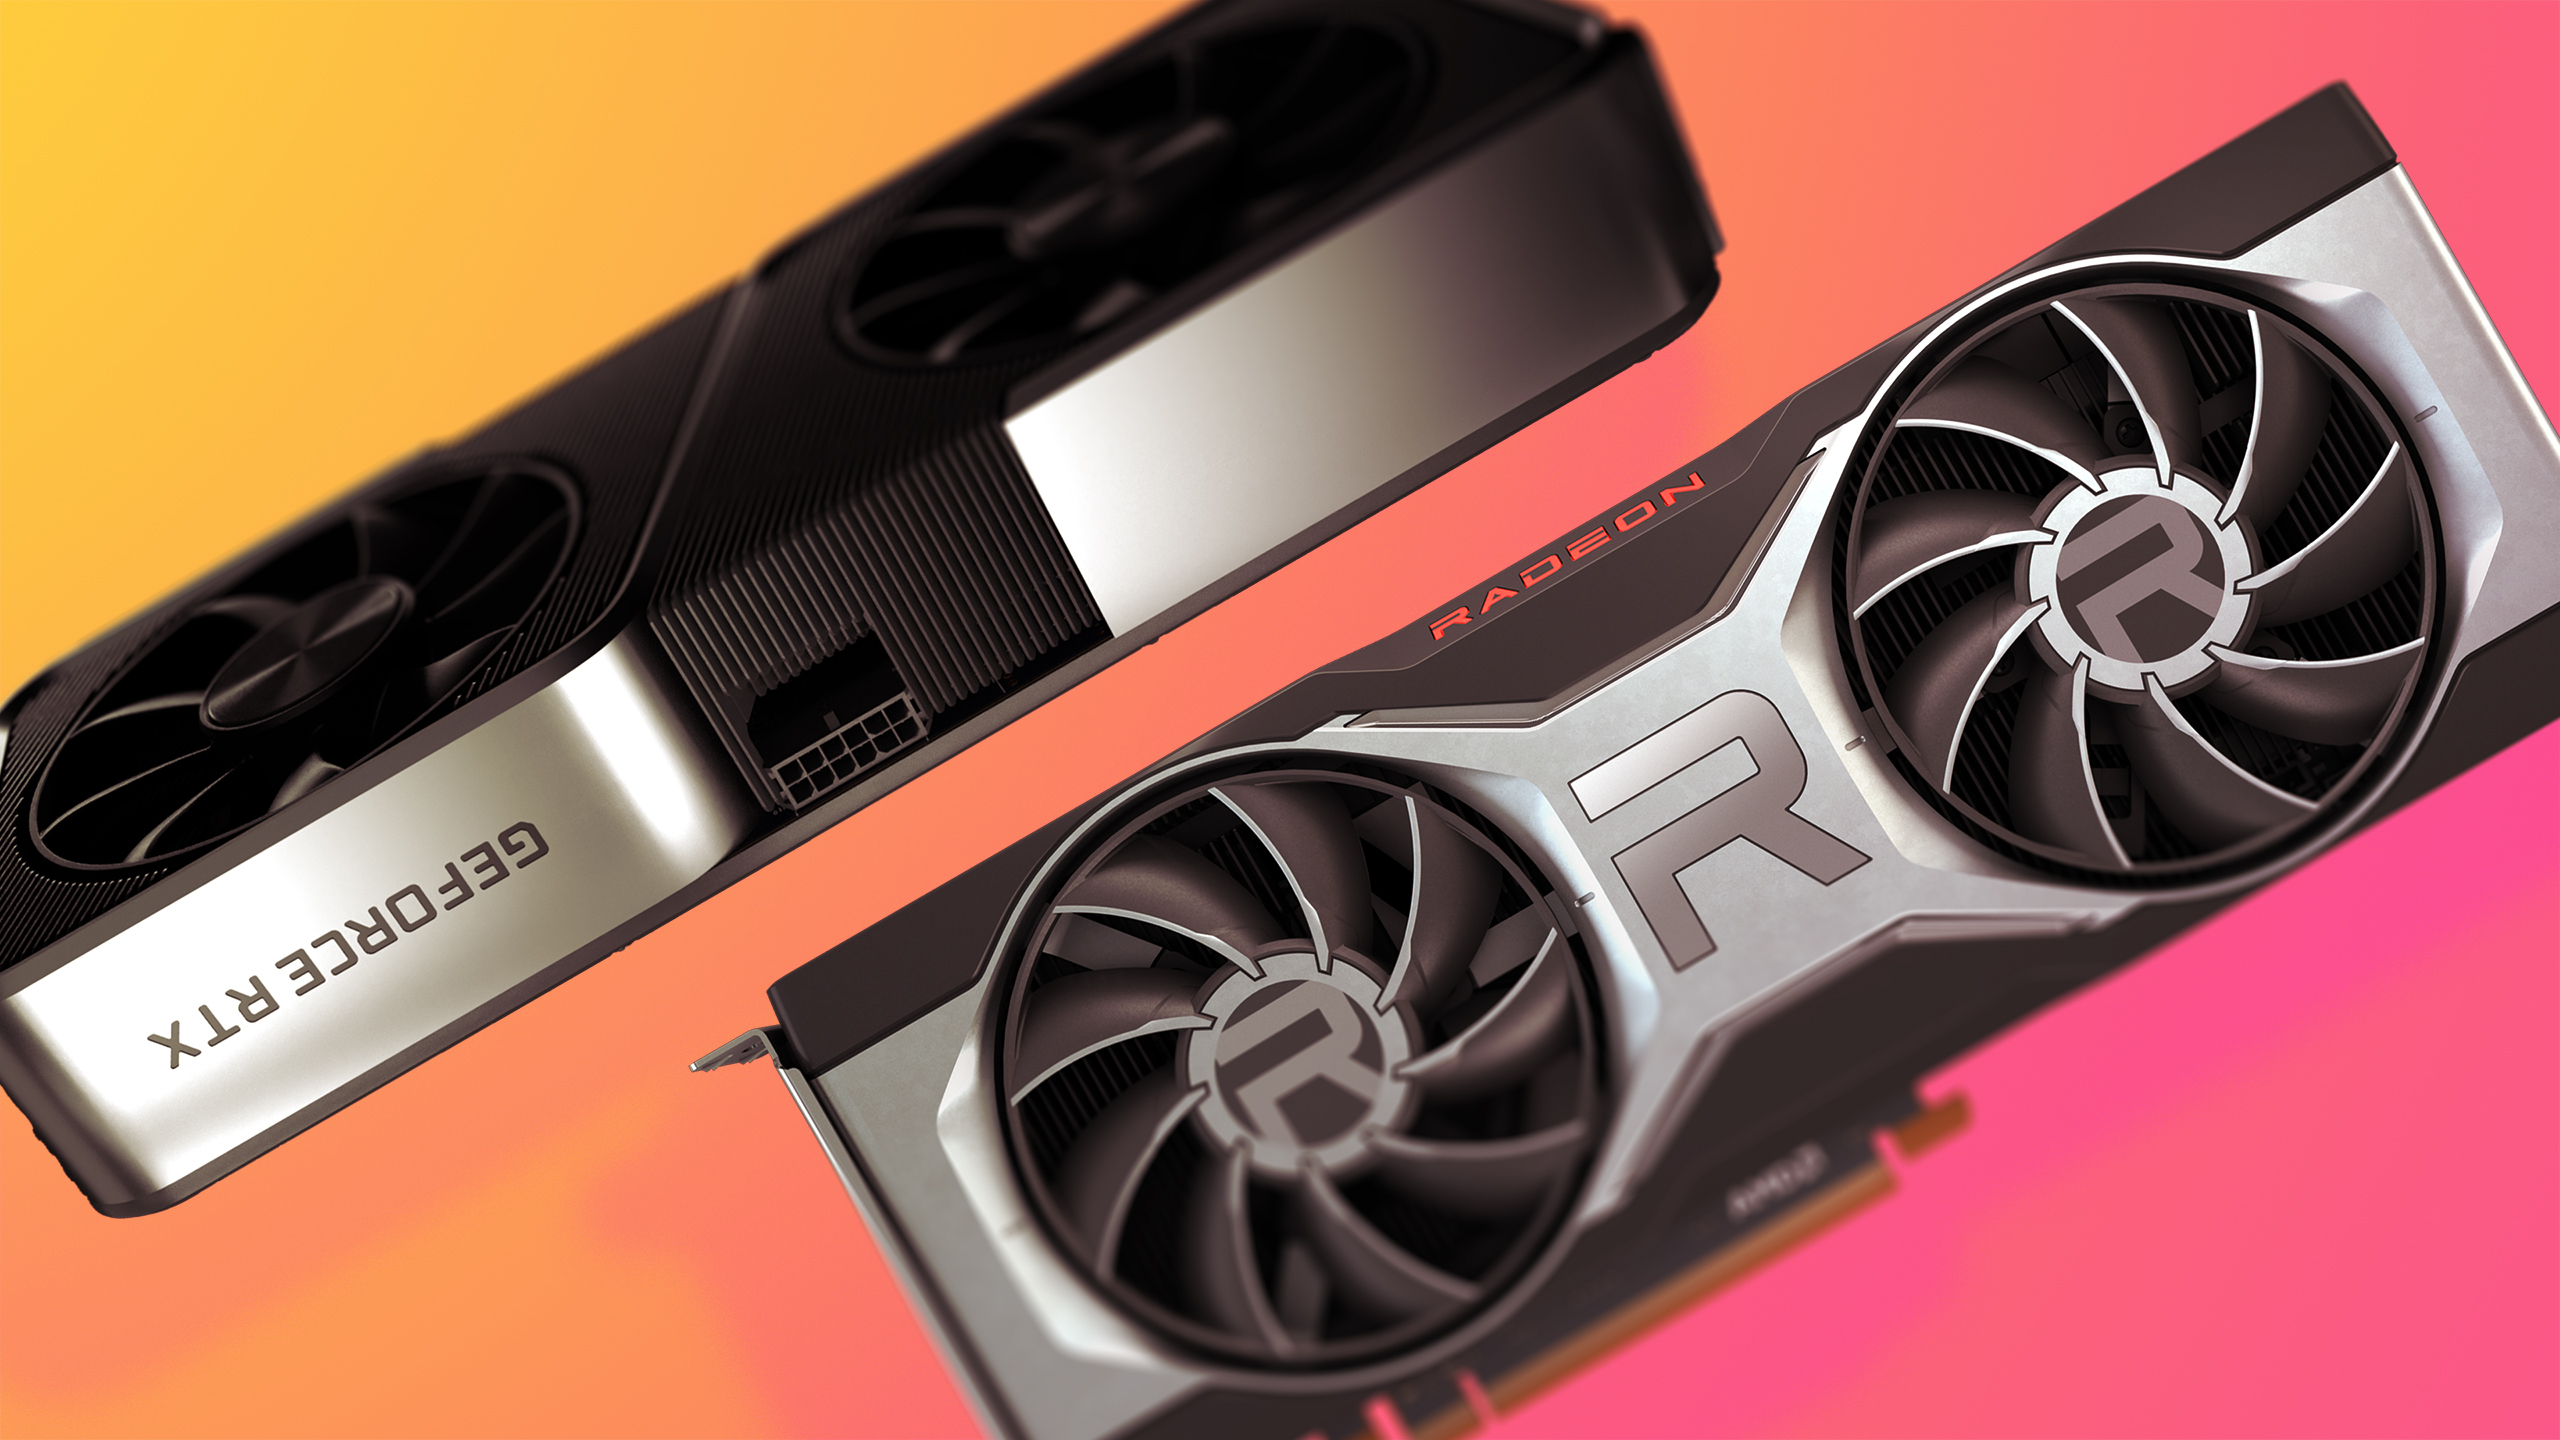 Nvidia RTX 3070 and AMD RX 6700 XT side-by-side on a colorful background